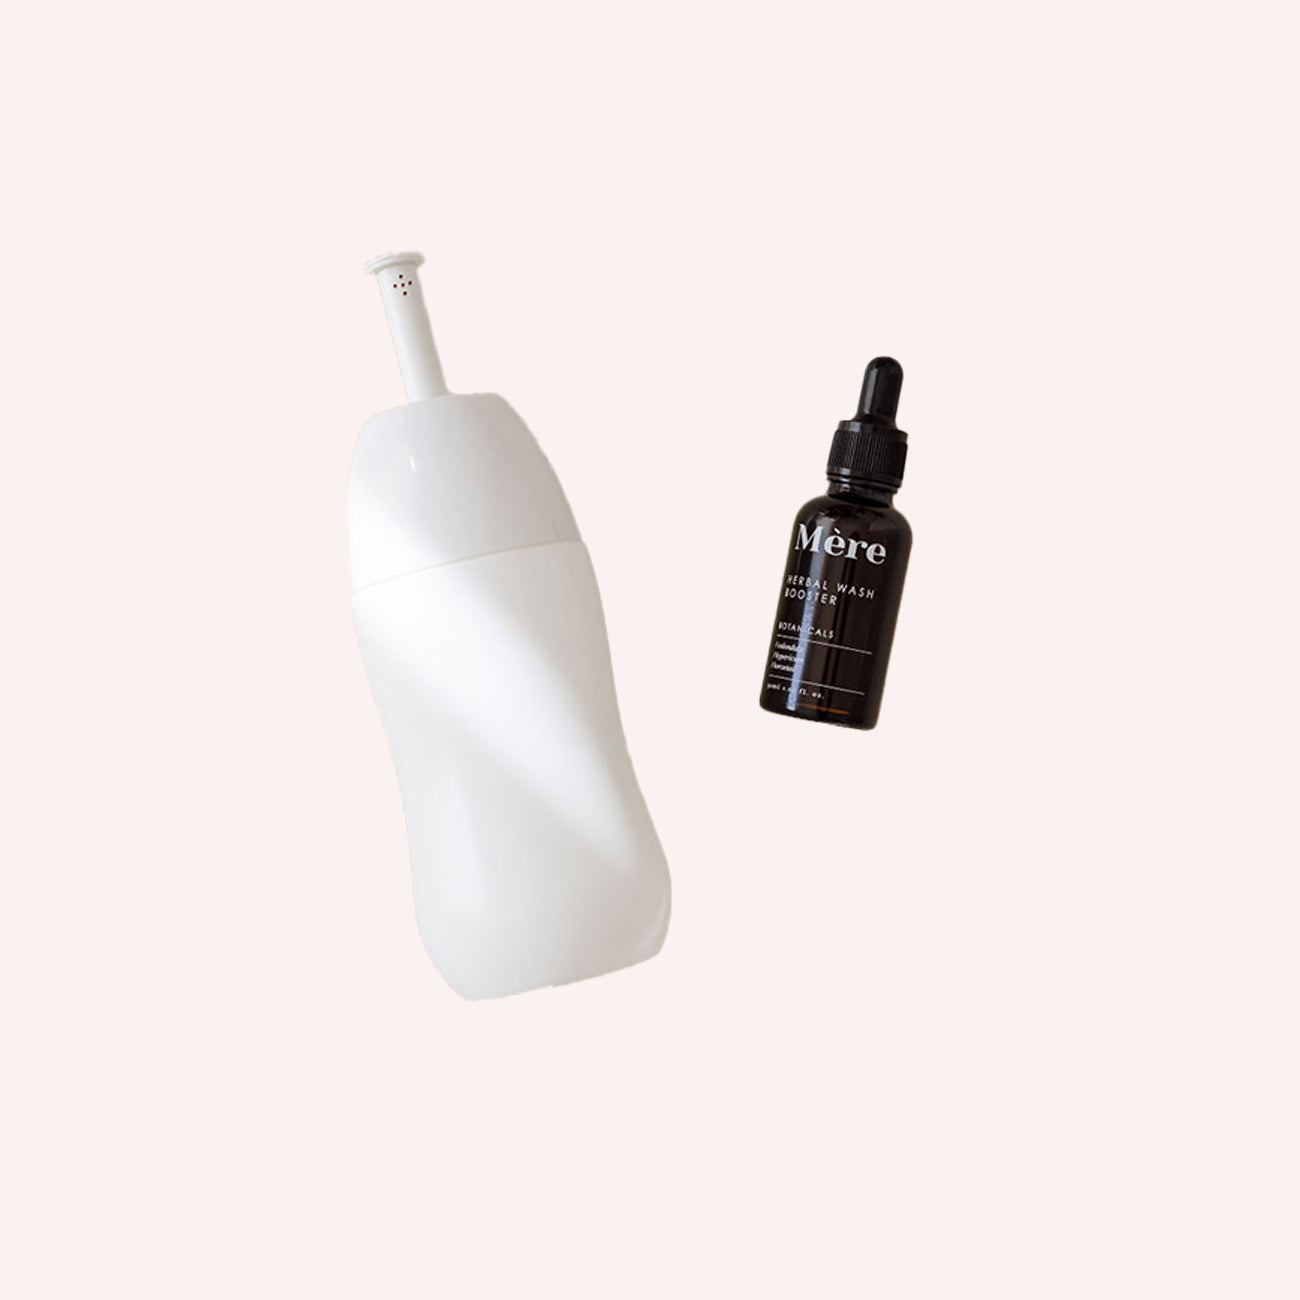 Perineal Wash Bottle with Herbal Booster